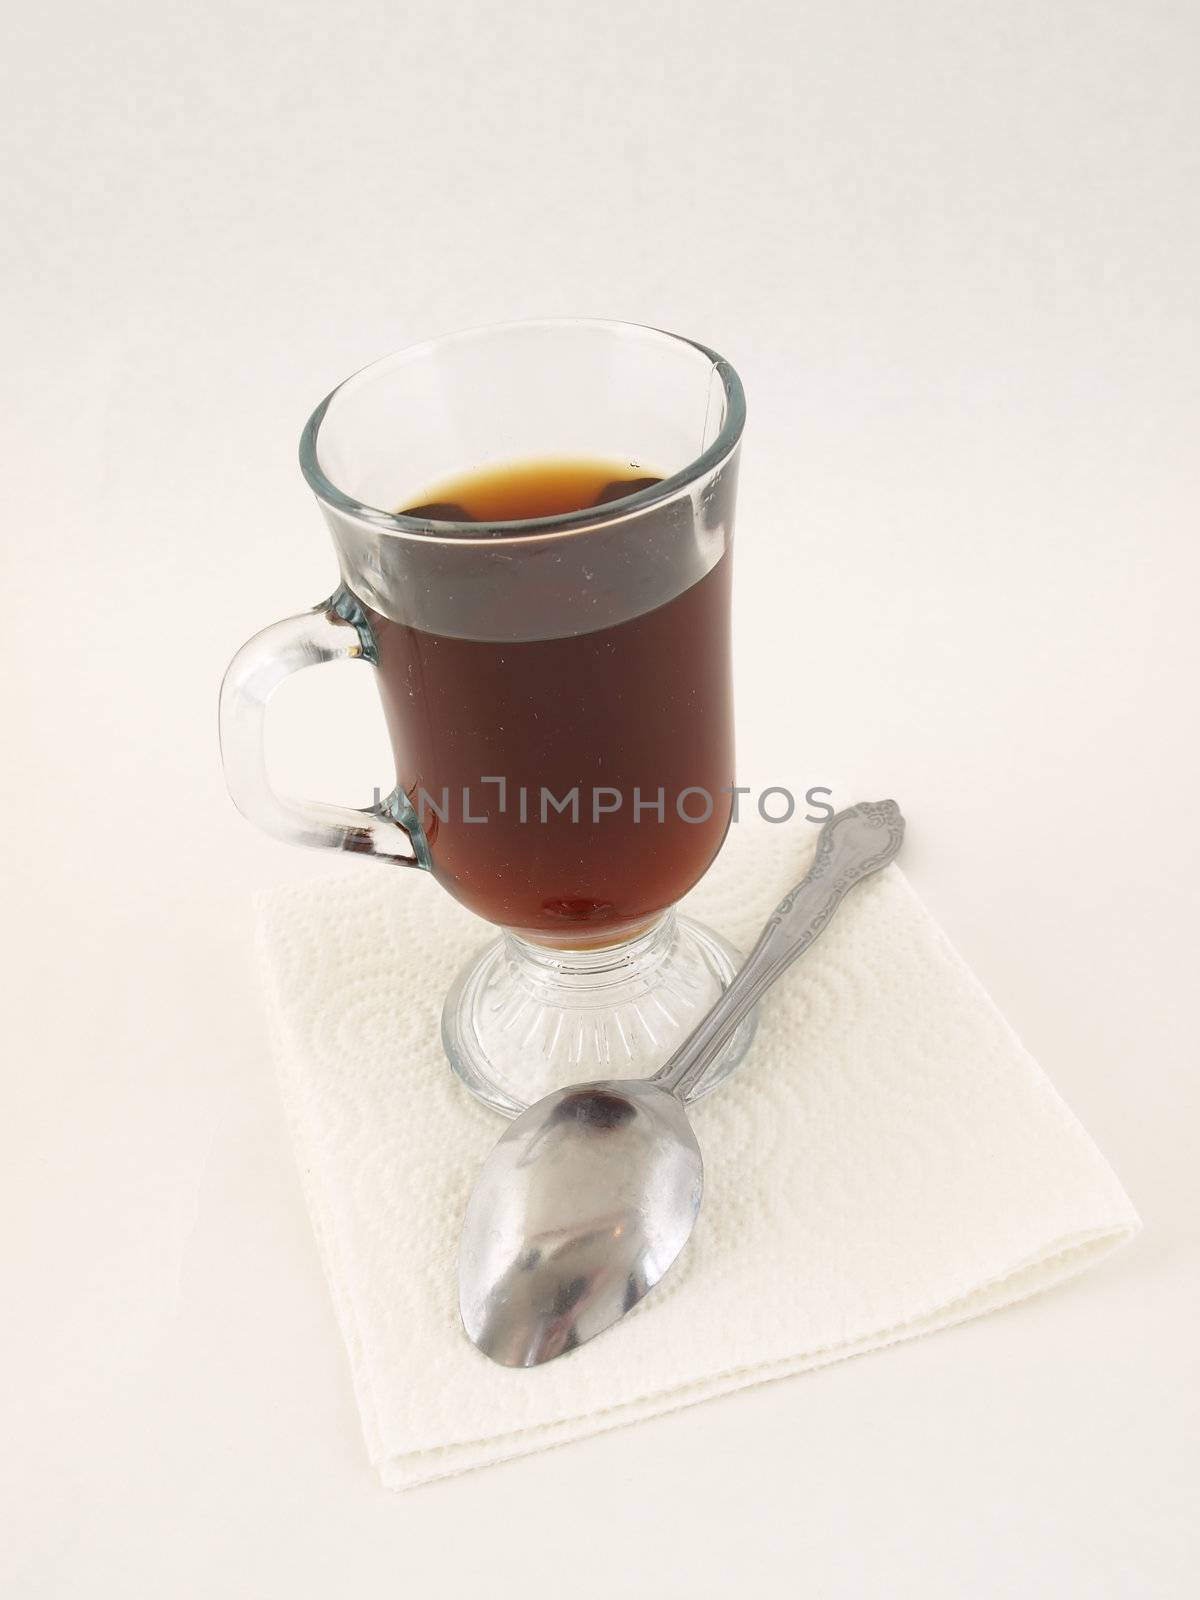 A glass of hot coffee and a silver tablespoon over a white background.